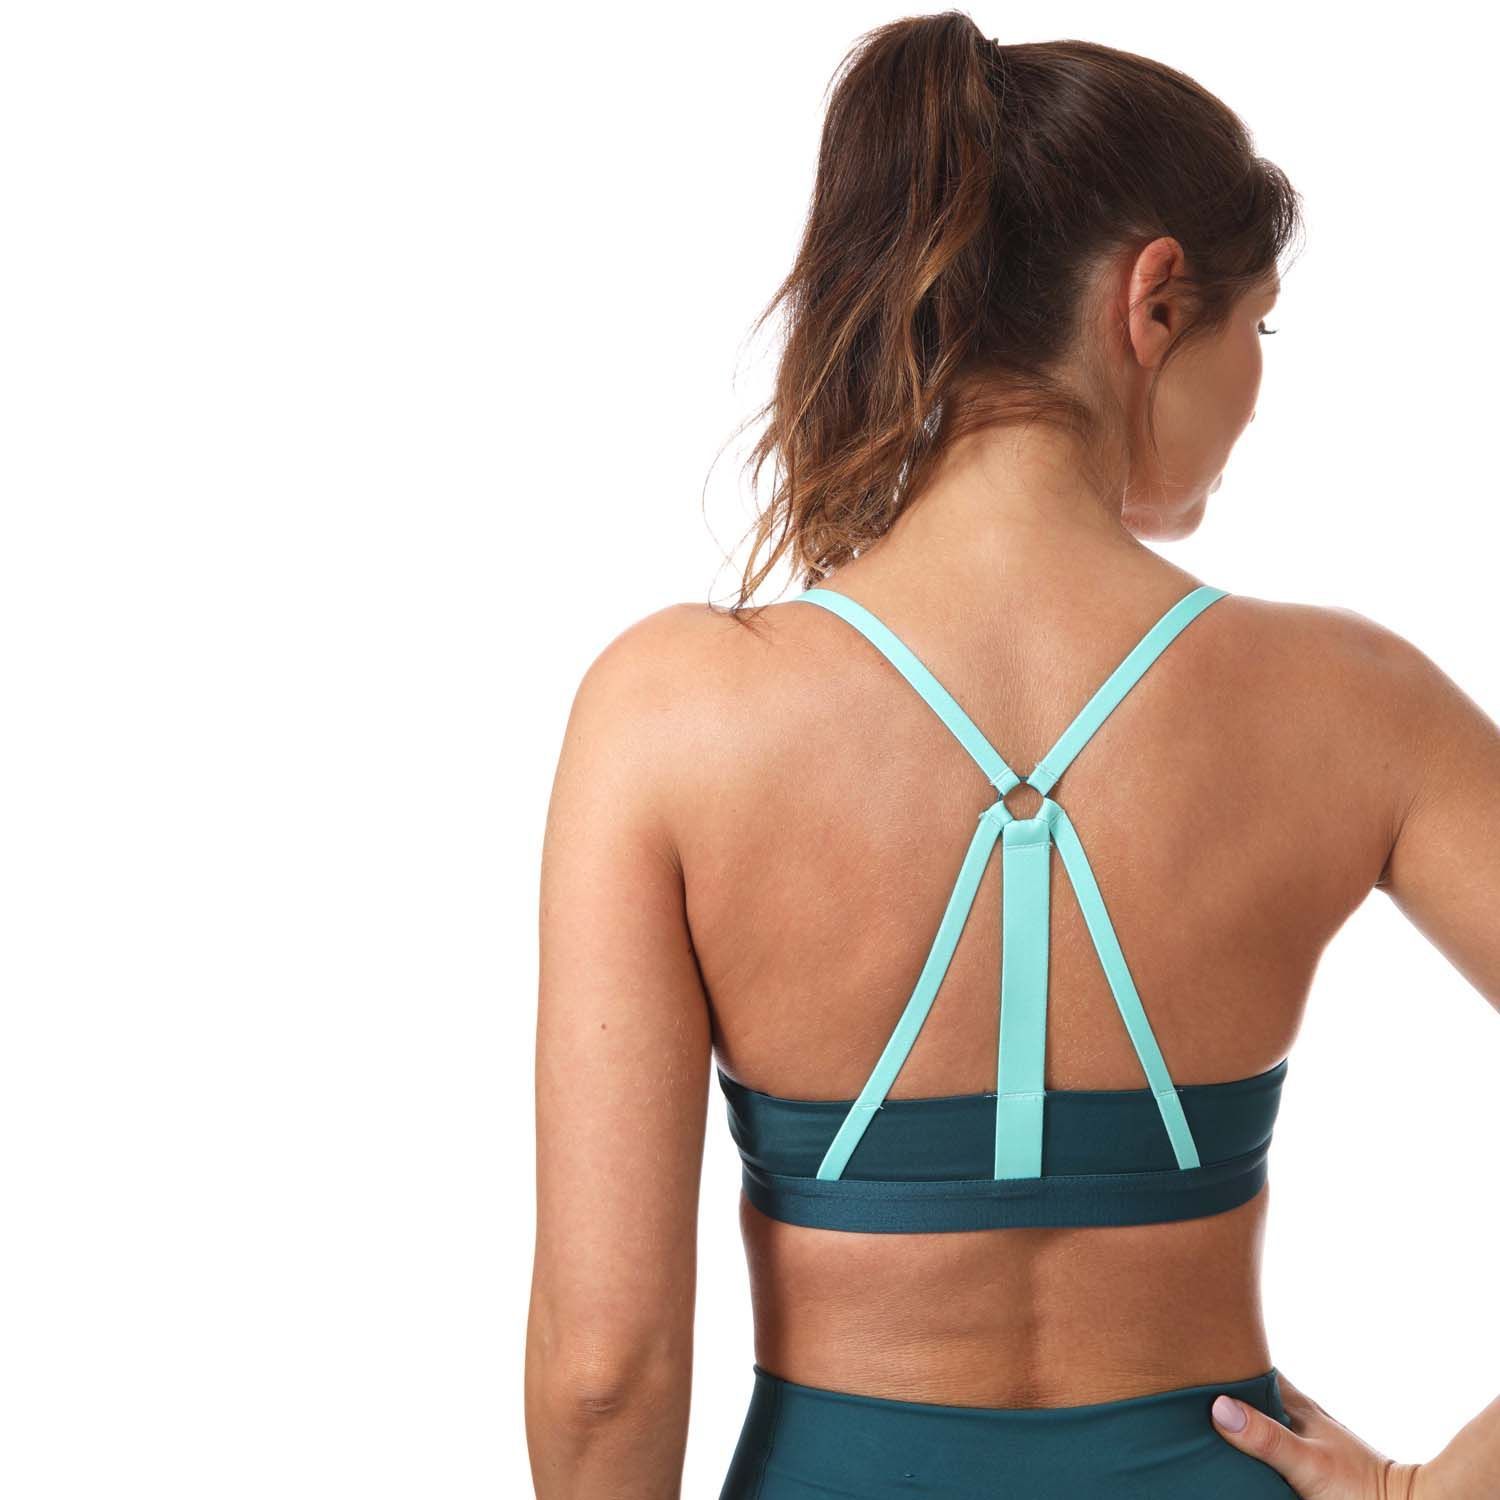 Womens adidas All Me Light Support Summer Bra in teal.- Scoop neck.- Strappy back.- Removable pads.- Soft and smooth feel.- Low-impact support.- Breathable hem.- Power mesh layer.- Compression fit.- Body: 79% Polyester (Recycled)  21% Elastane. Lining: 80% Polyester (Recycled)  20% Elastane.- Ref: GM2797